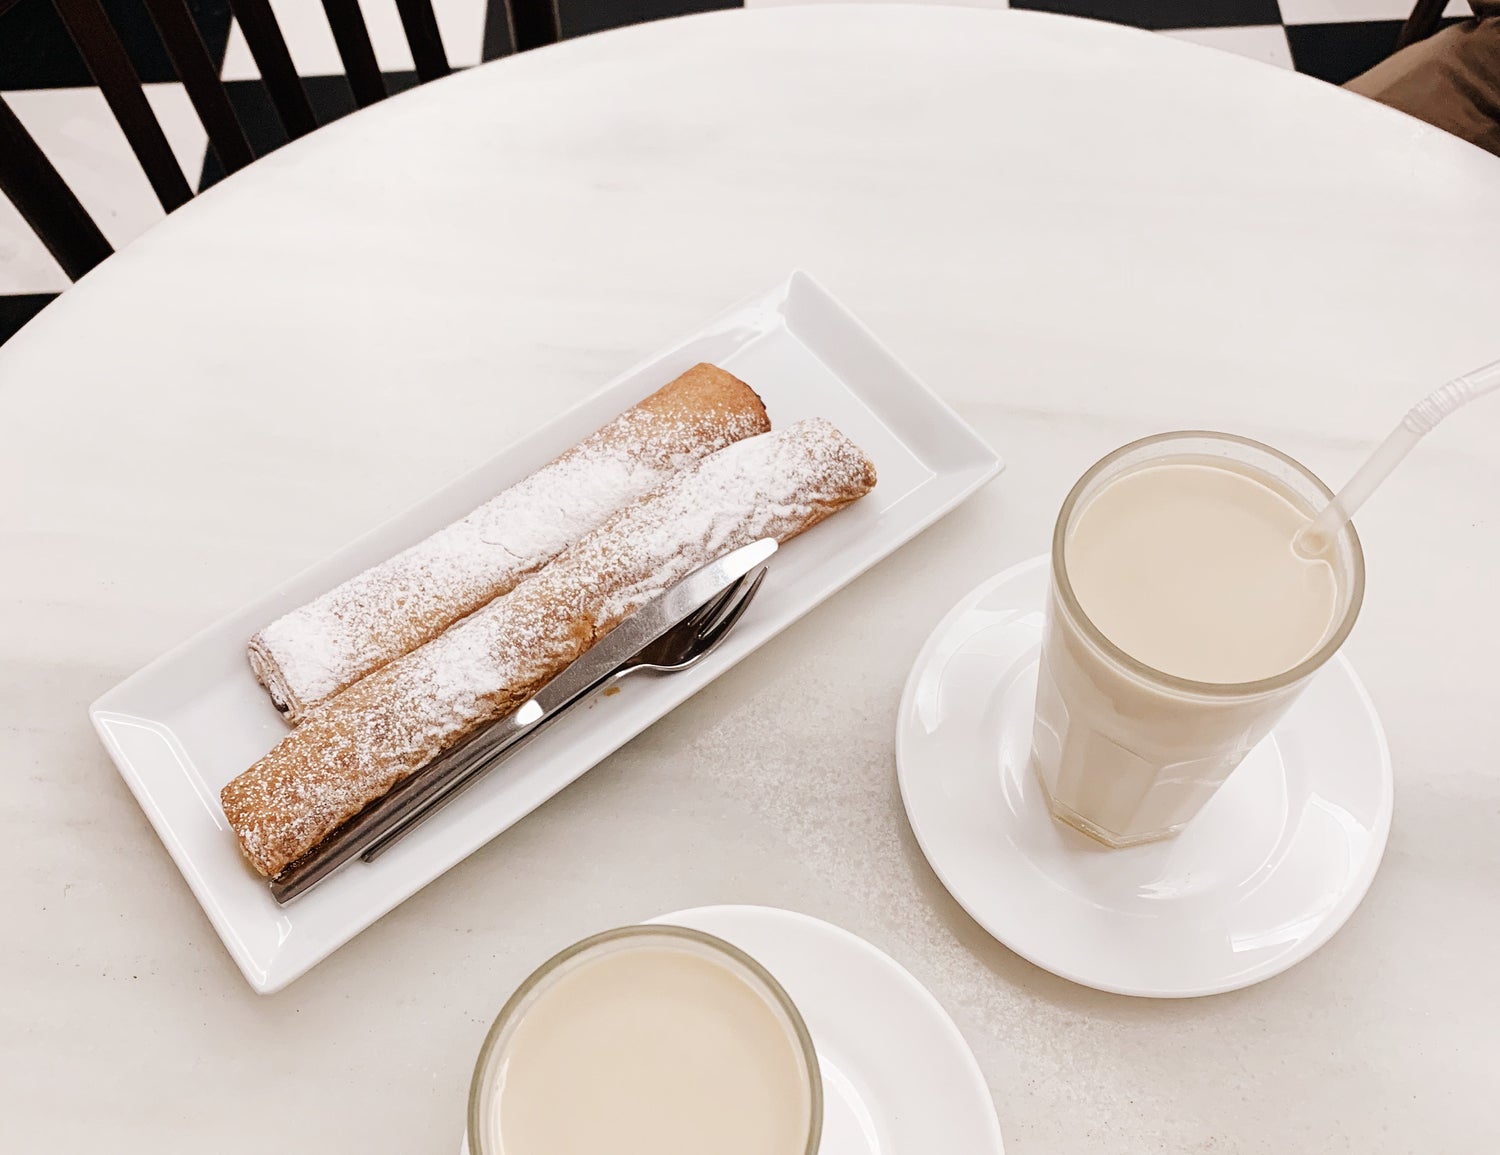 Two glasses of horchata are being served with fartón cake